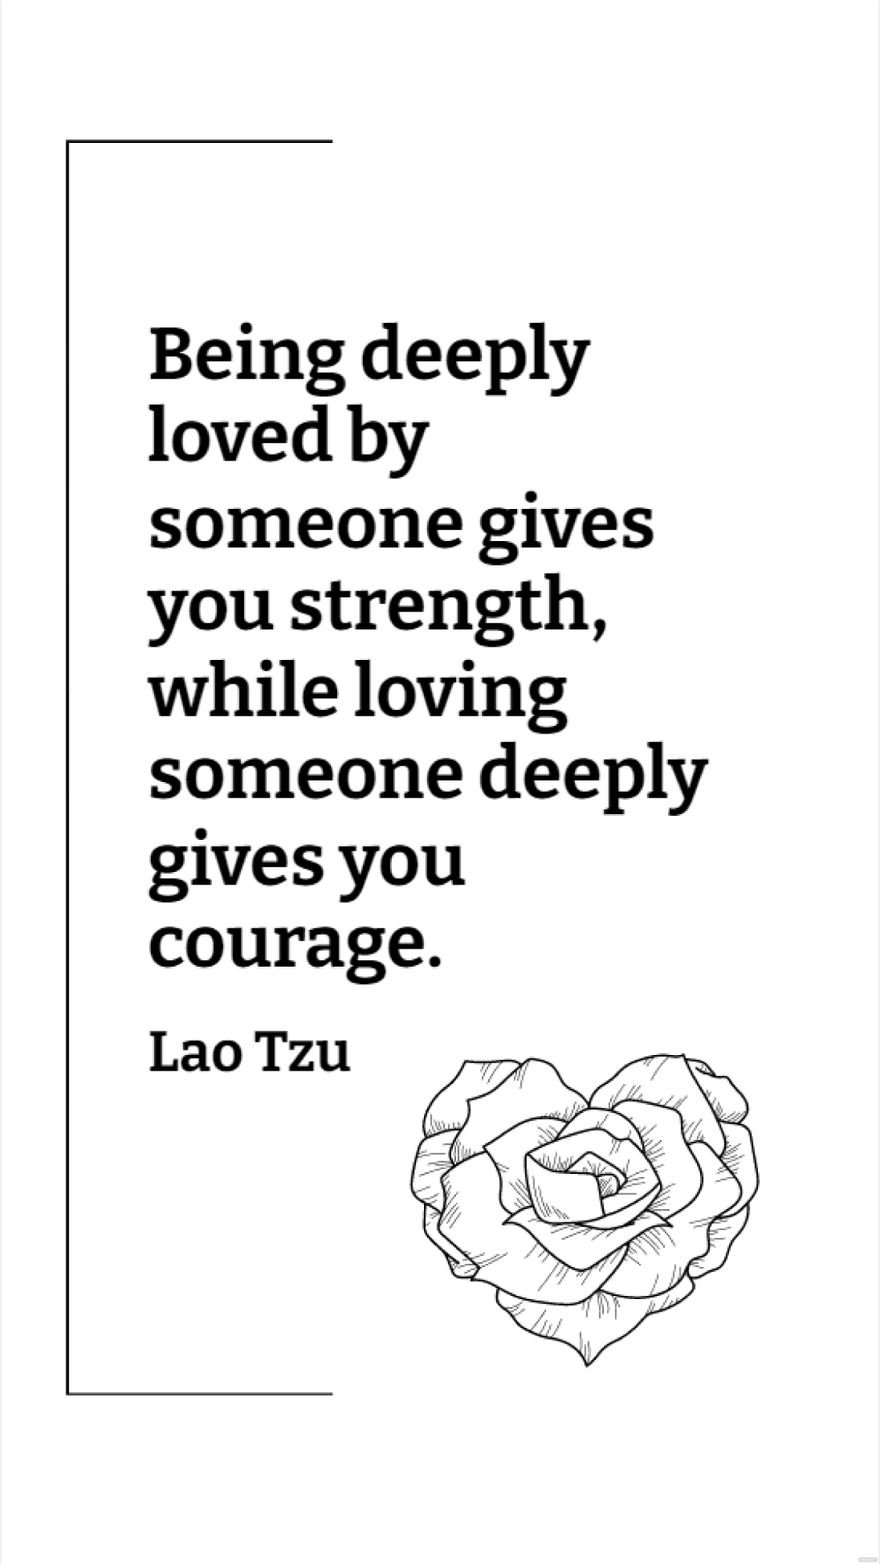 Lao Tzu - Being deeply loved by someone gives you strength, while loving someone deeply gives you courage.